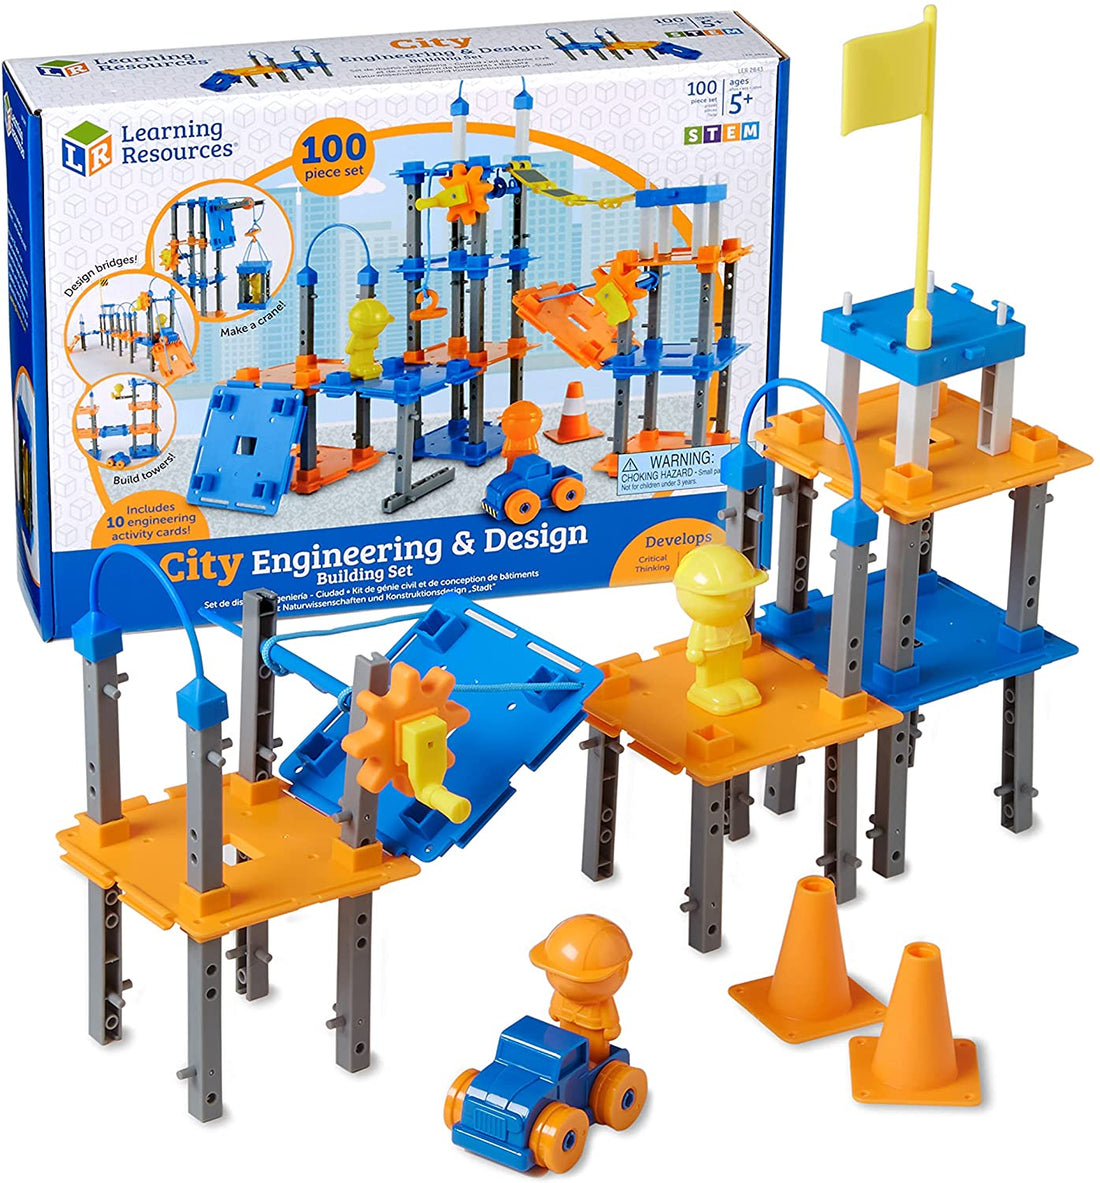 Learning Resources City Engineering and Design Building Set, Engineer STEM Toy, Construction Toys, 100 Pieces, Simple Machines Kids, Ages 5+ $14.90